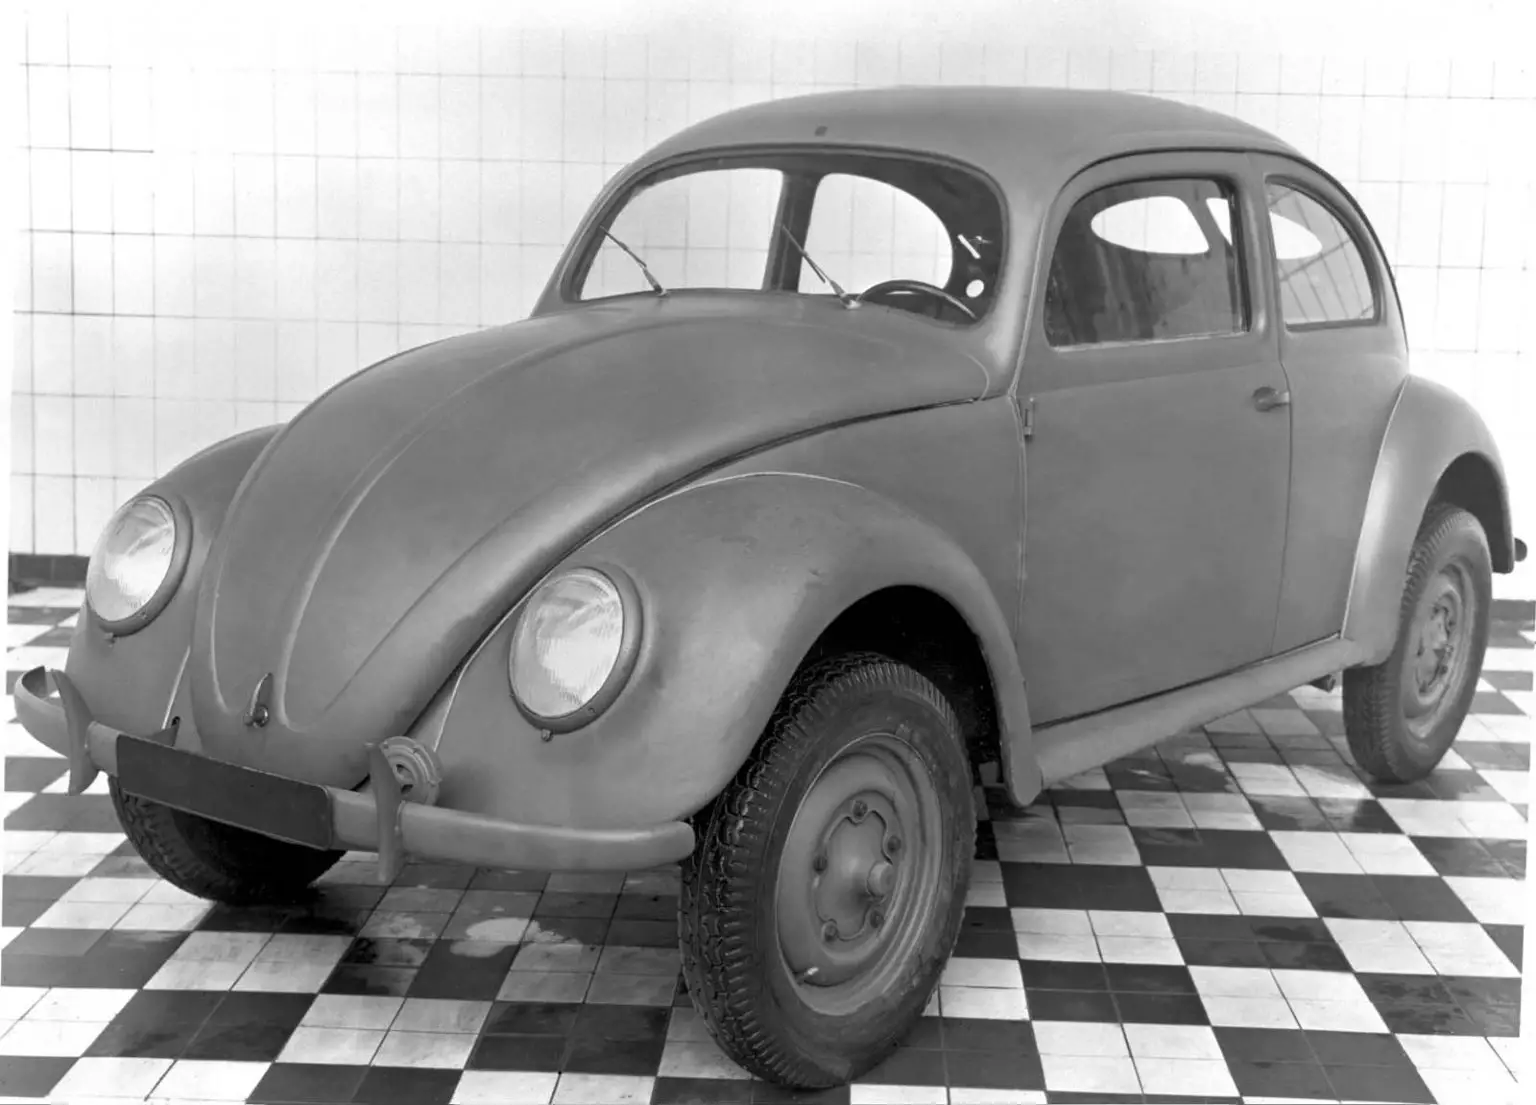 Production Of The Volkswagen Beetle Started 75 Years Ago In Wolfsburg